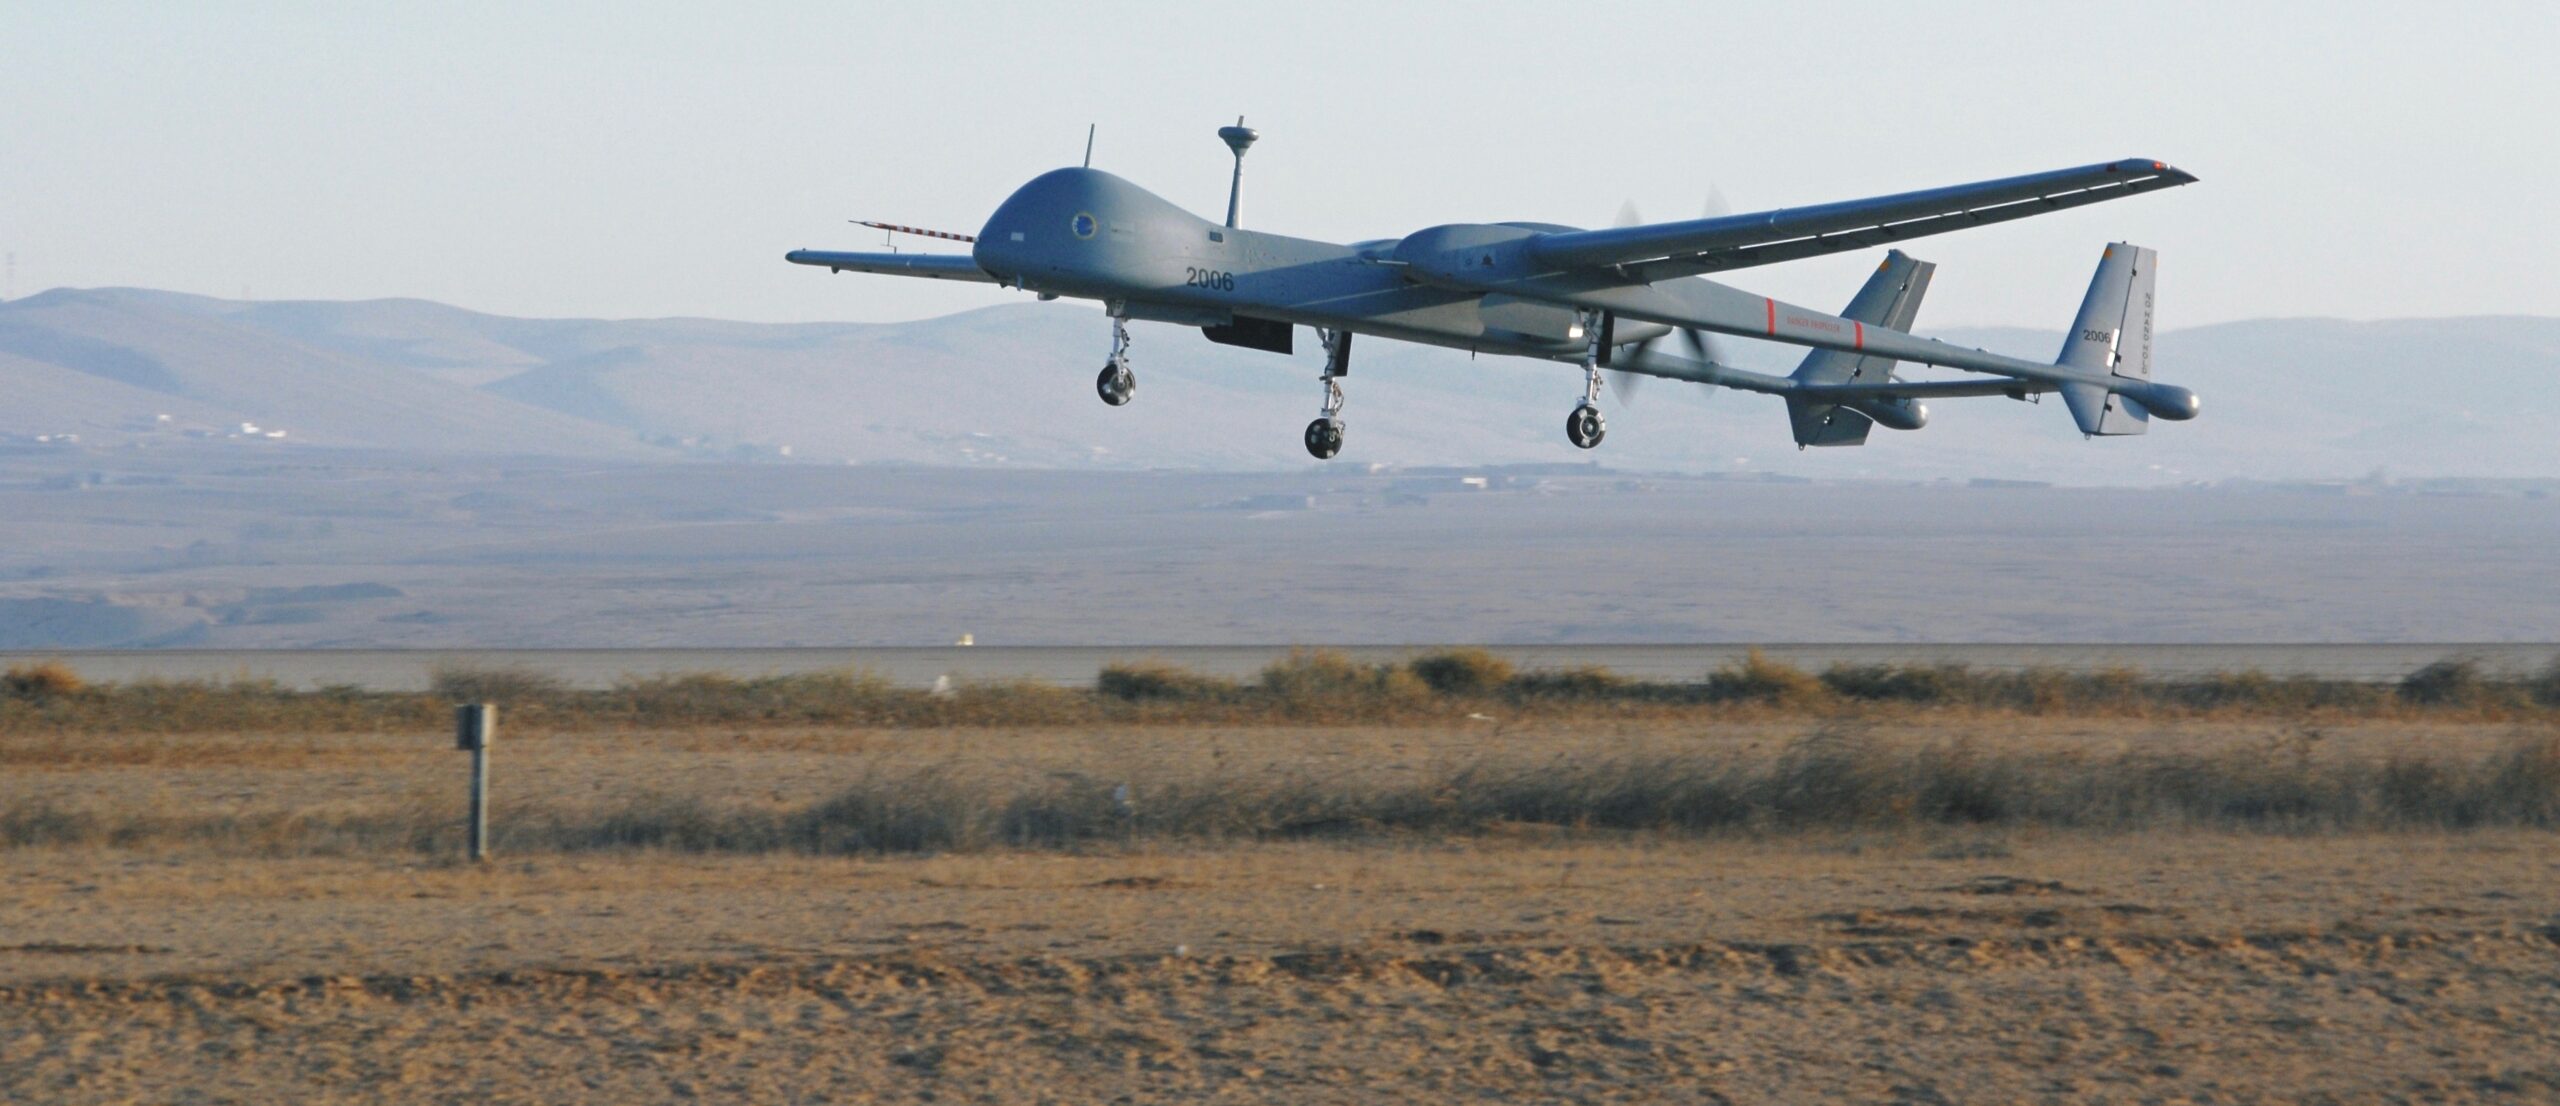 EXCLUSIVE: Drones Now Dominate Israeli Flying Operations